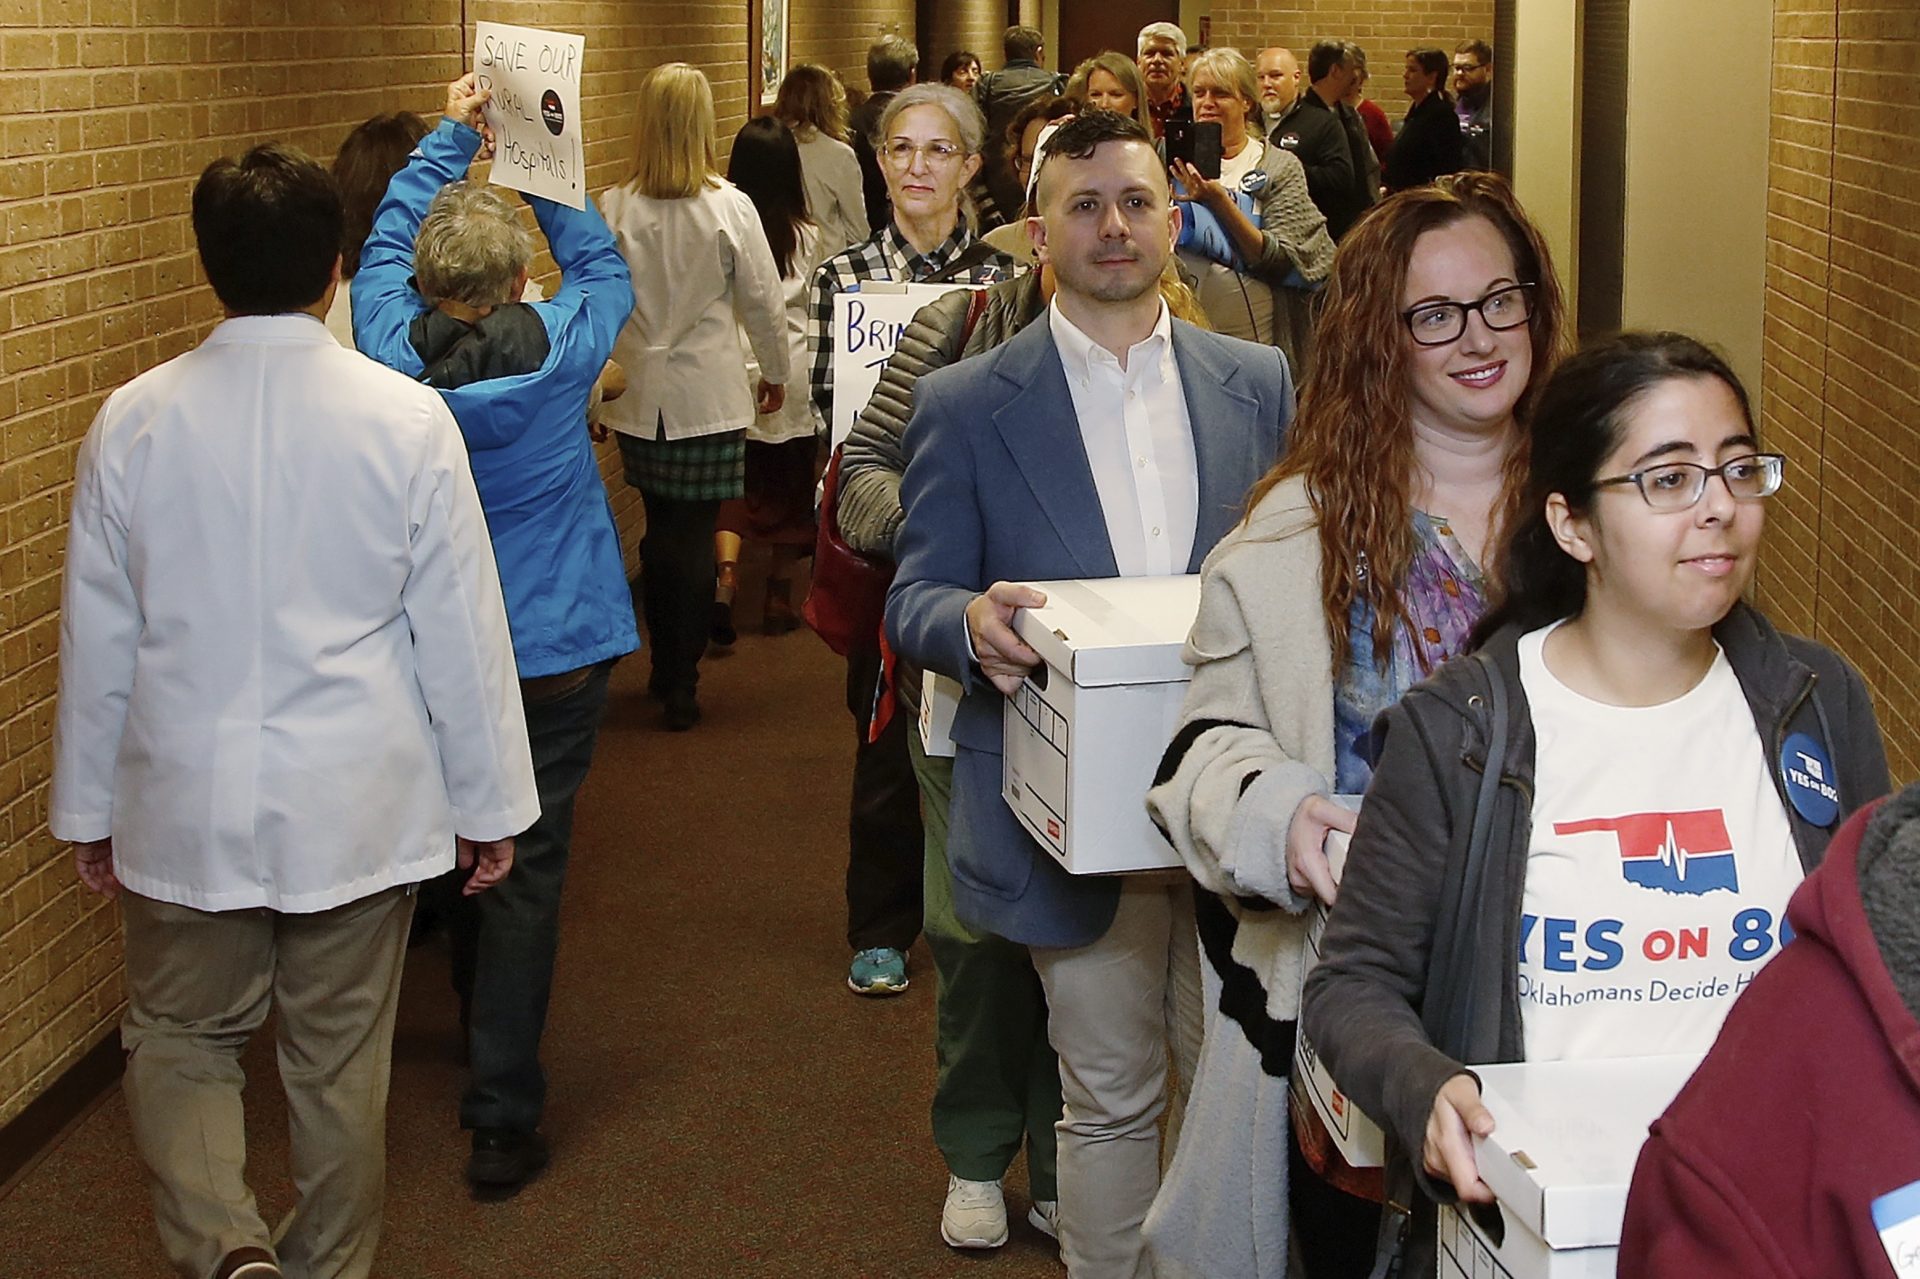 Supporters of Yes on 802 Oklahomans Decide Healthcare, calling for Medicaid expansion to be put on the ballot, carry boxes of petitions into the office of the Oklahoma Secretary of State, Thursday, Oct. 24, 2019, in Oklahoma City. The signatures of about 178,000 registered voters are needed to get the question on the ballot, and supporters say they obtained about 313,000 signatures.